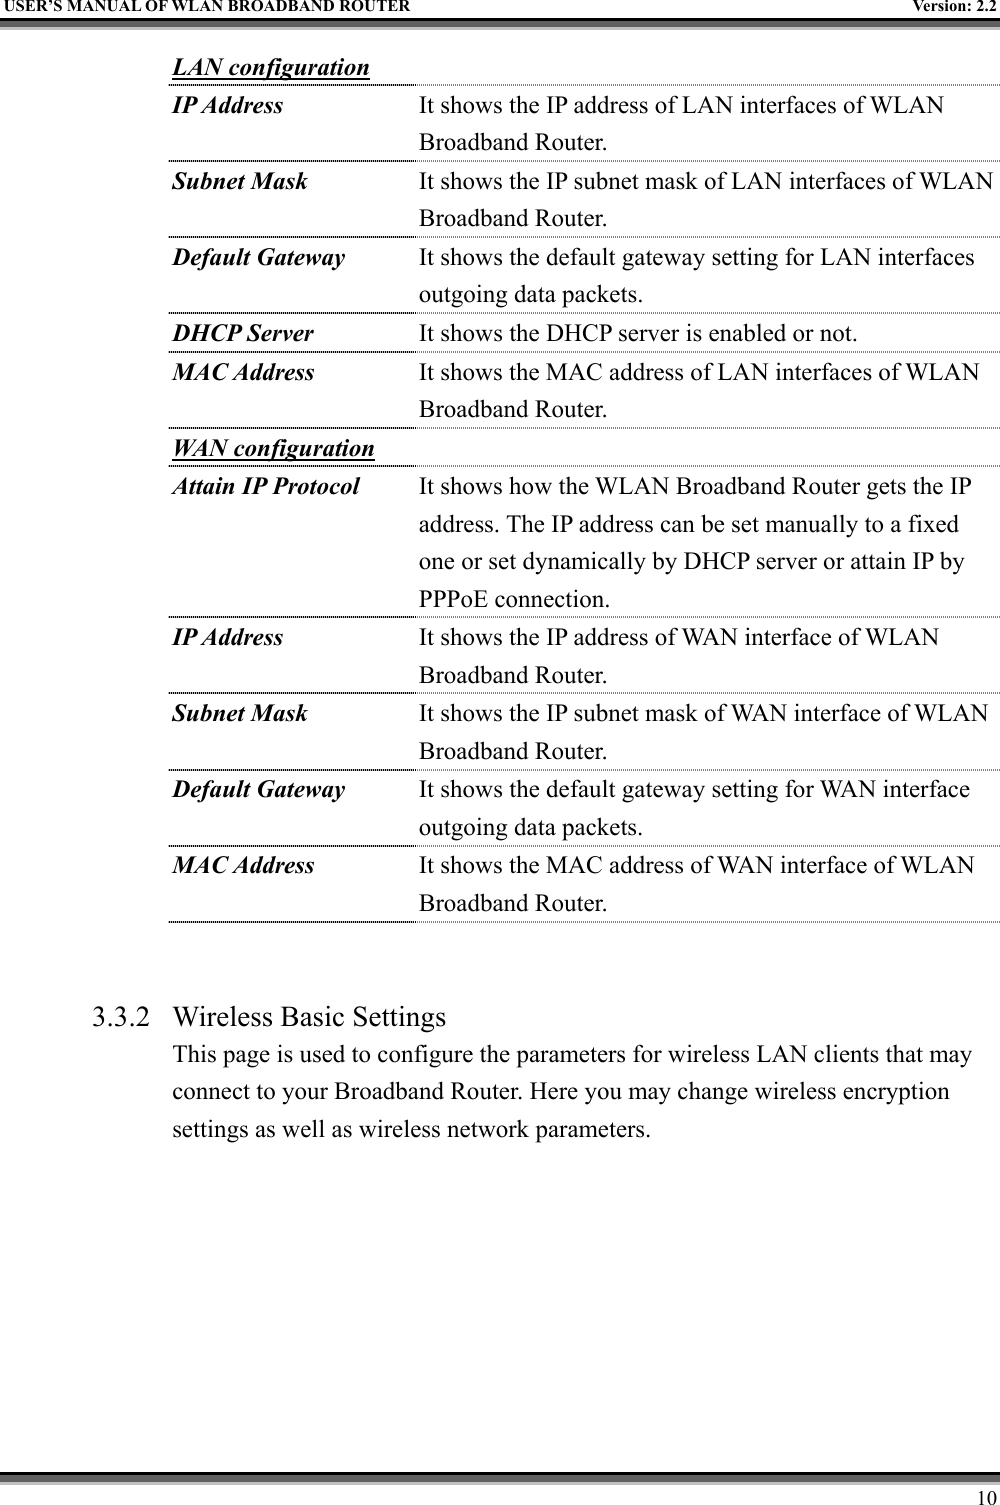   USER’S MANUAL OF WLAN BROADBAND ROUTER    Version: 2.2     10 LAN configuration  IP Address It shows the IP address of LAN interfaces of WLAN Broadband Router. Subnet Mask It shows the IP subnet mask of LAN interfaces of WLAN Broadband Router. Default Gateway It shows the default gateway setting for LAN interfaces outgoing data packets. DHCP Server  It shows the DHCP server is enabled or not. MAC Address It shows the MAC address of LAN interfaces of WLAN Broadband Router. WAN configuration  Attain IP Protocol It shows how the WLAN Broadband Router gets the IP address. The IP address can be set manually to a fixed one or set dynamically by DHCP server or attain IP by PPPoE connection. IP Address It shows the IP address of WAN interface of WLAN Broadband Router. Subnet Mask It shows the IP subnet mask of WAN interface of WLAN Broadband Router. Default Gateway It shows the default gateway setting for WAN interface outgoing data packets. MAC Address It shows the MAC address of WAN interface of WLAN Broadband Router.   3.3.2  Wireless Basic Settings This page is used to configure the parameters for wireless LAN clients that may connect to your Broadband Router. Here you may change wireless encryption settings as well as wireless network parameters.  